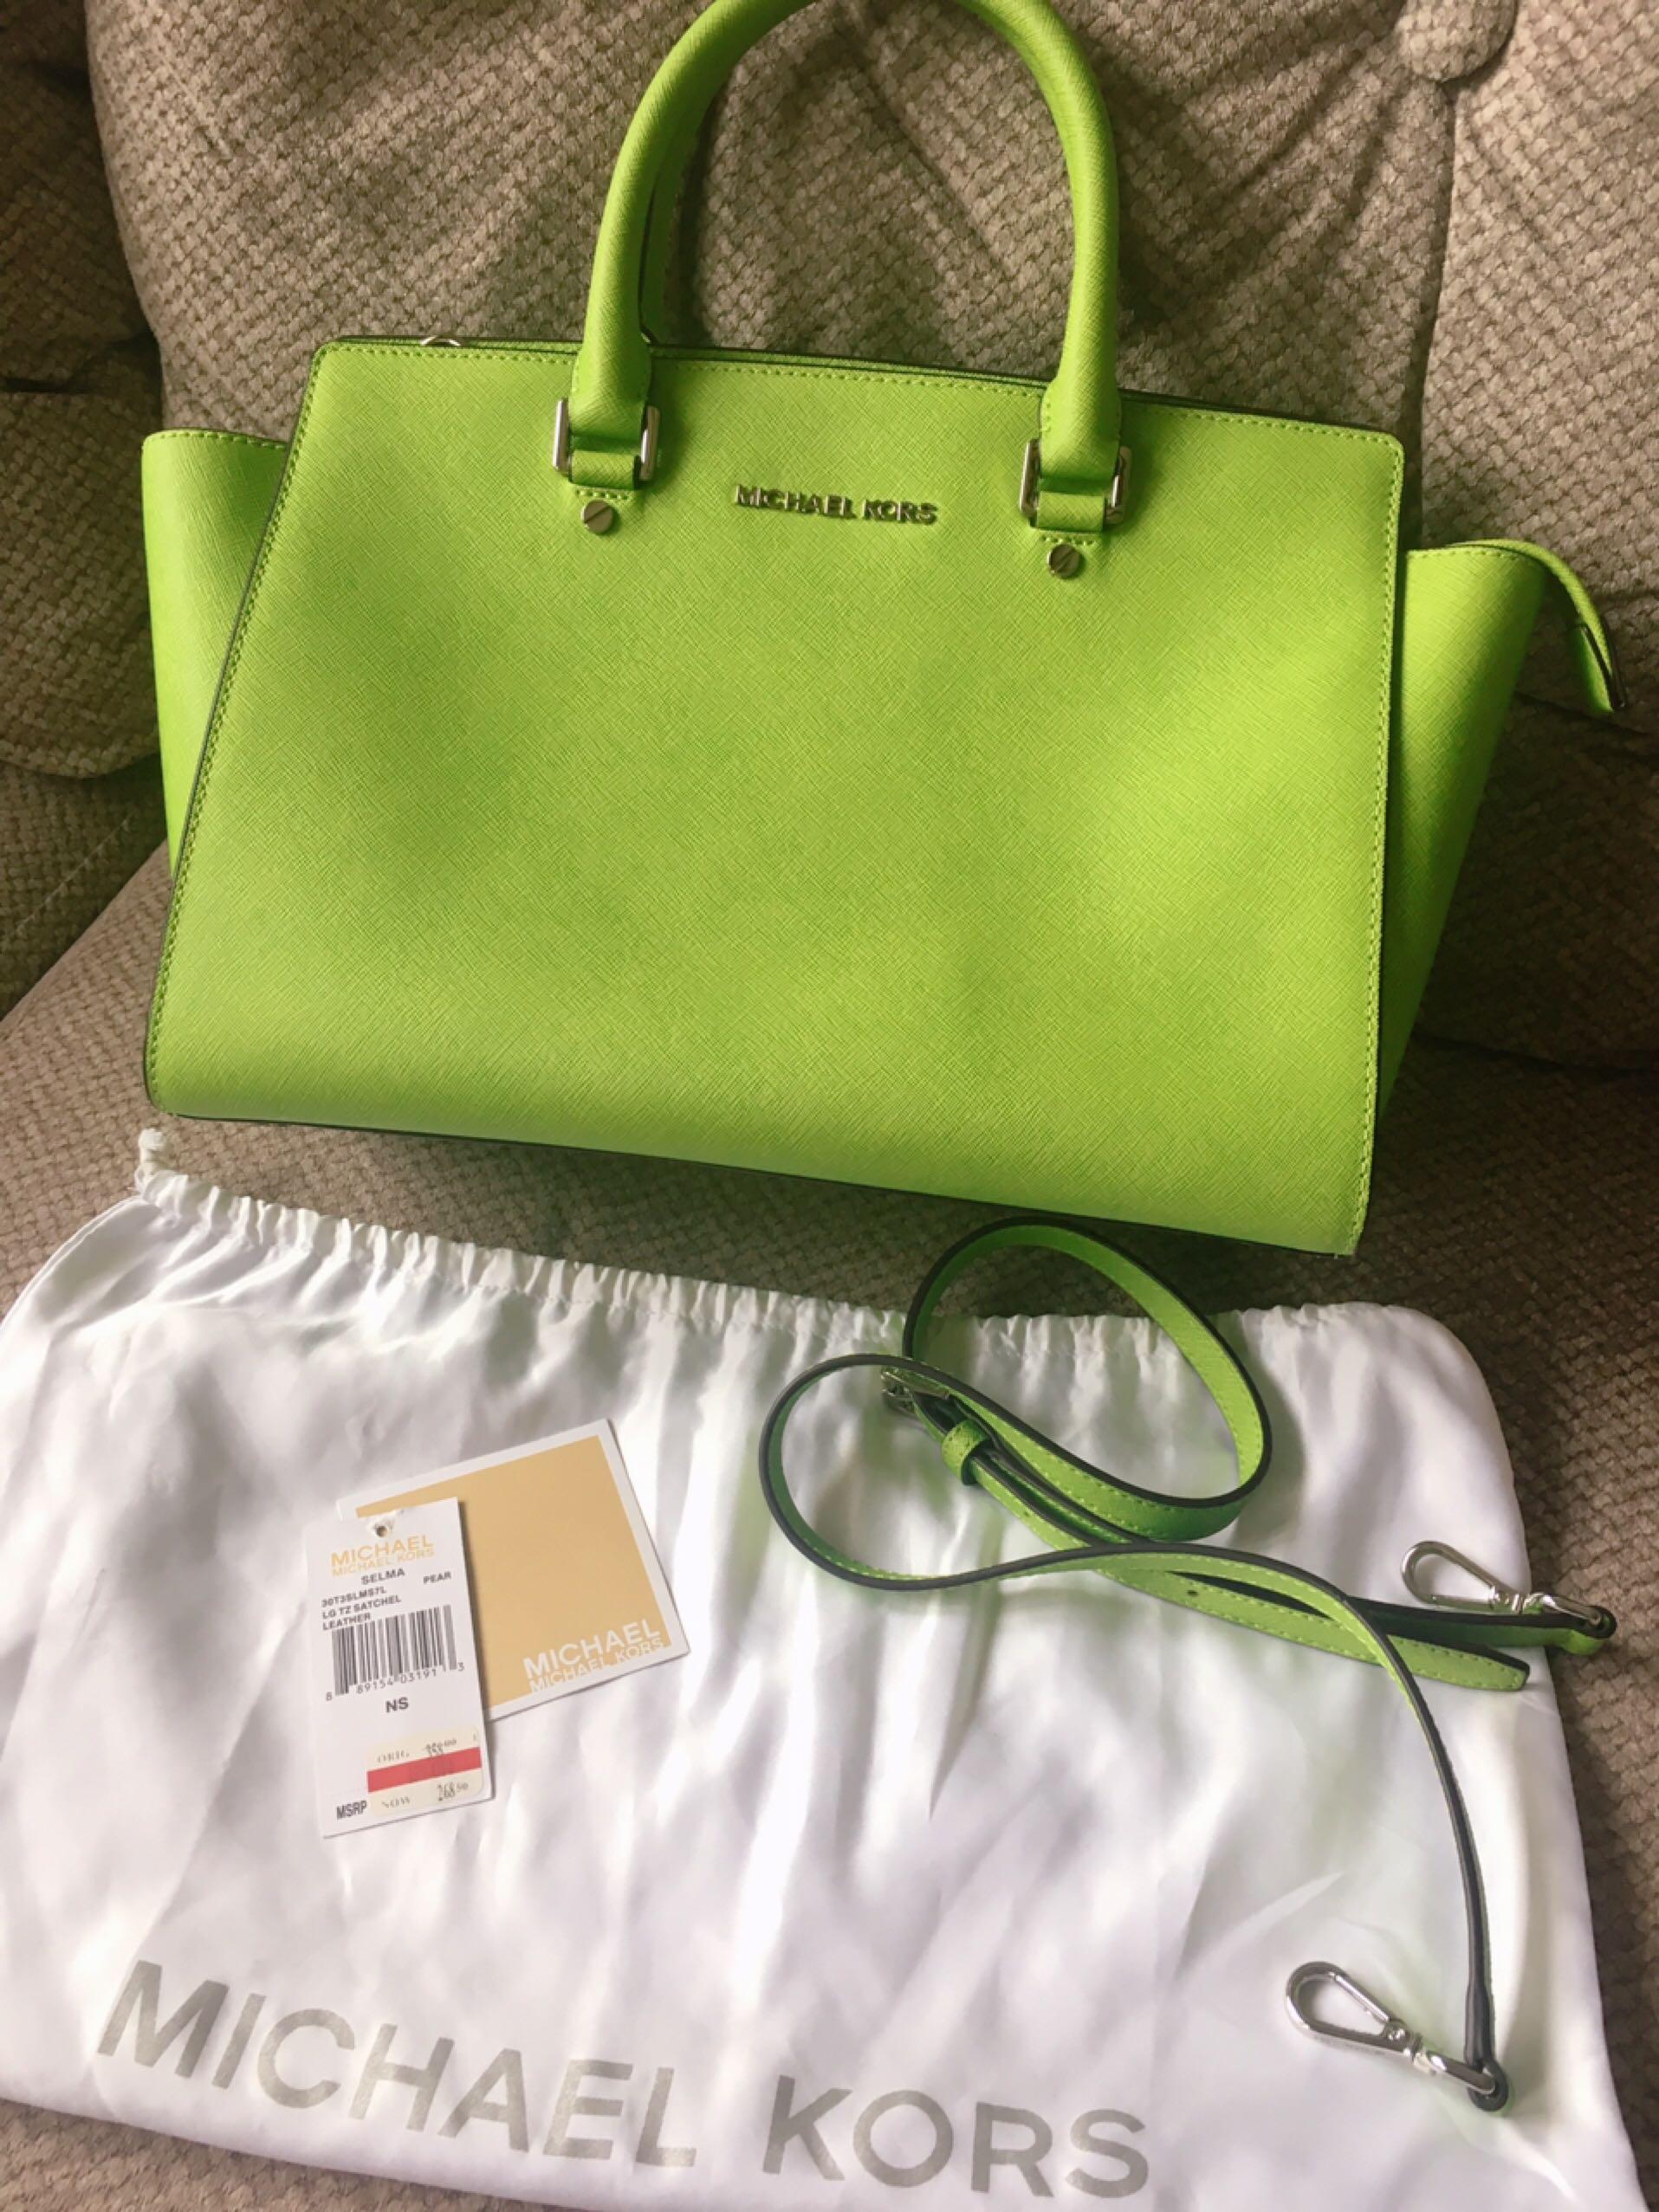 IMM outlet mall - Bring on all things green because it's St. Patrick's Day!  💚 Featuring: Shoes, tie and belt: Sacoor Outlet #01-15 Handbag and purse: Michael  Kors Outlet #01-125 Visit www.imm.sg